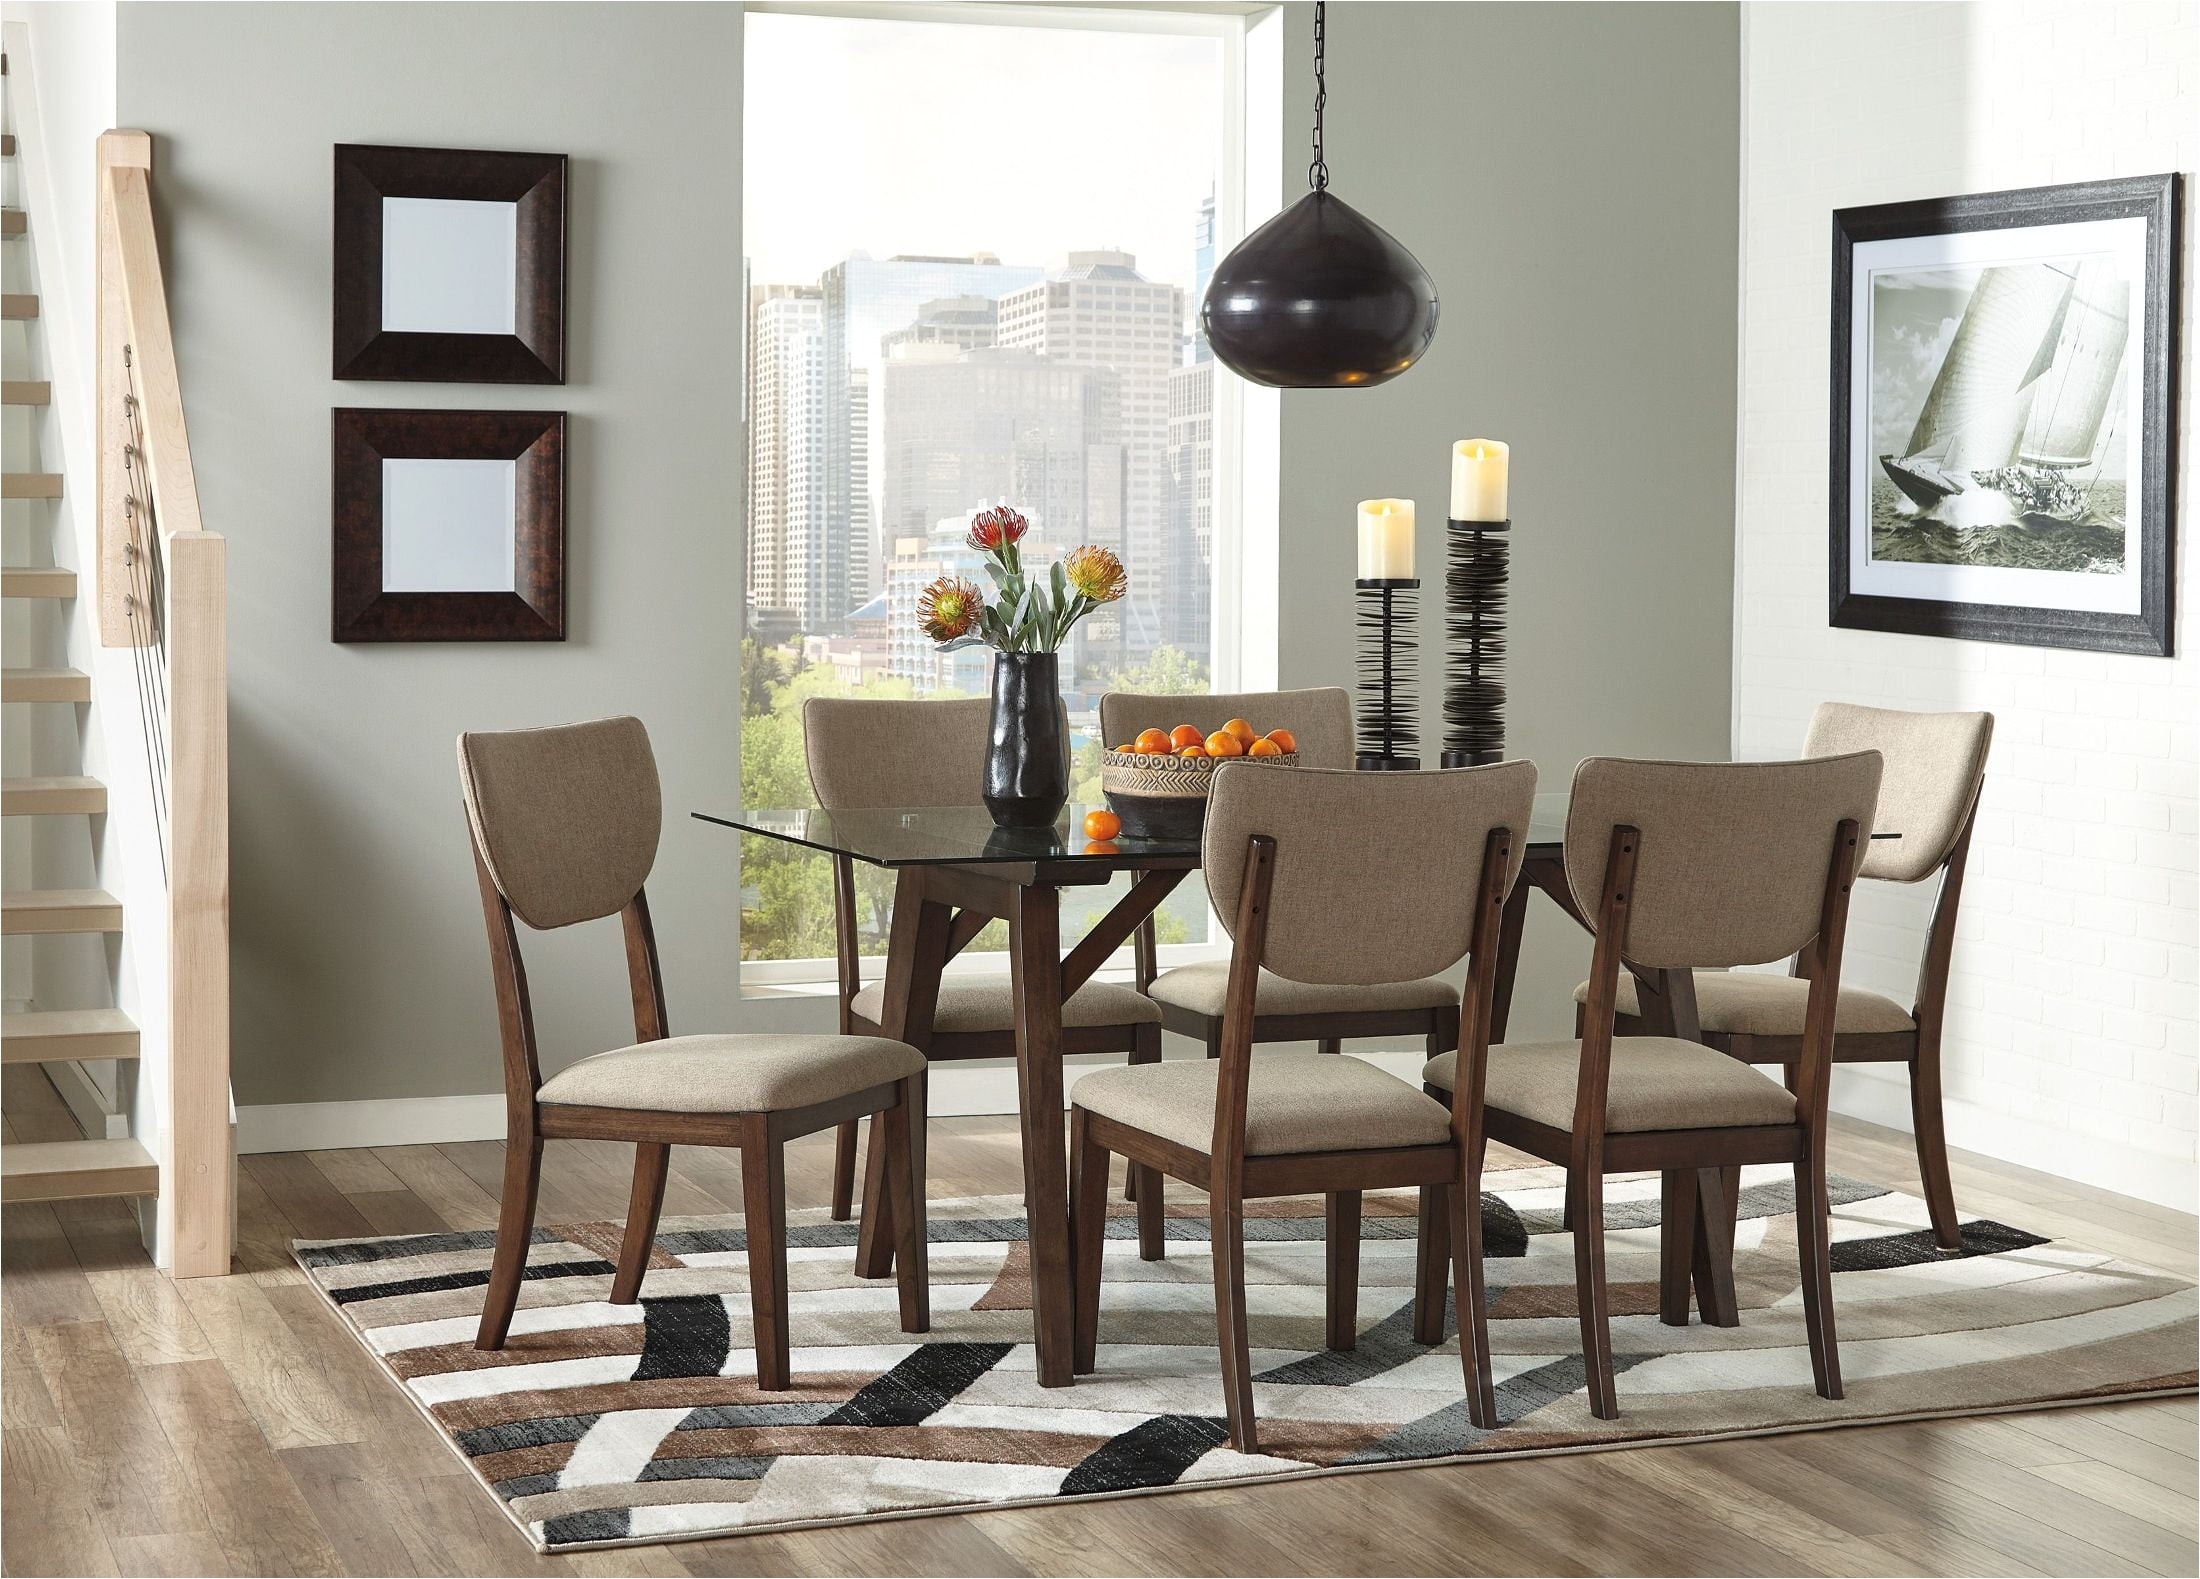 Dining Room Table with Wine Rack Underneath Joshton Brown Rectangular Dining Room Set From ashley Coleman